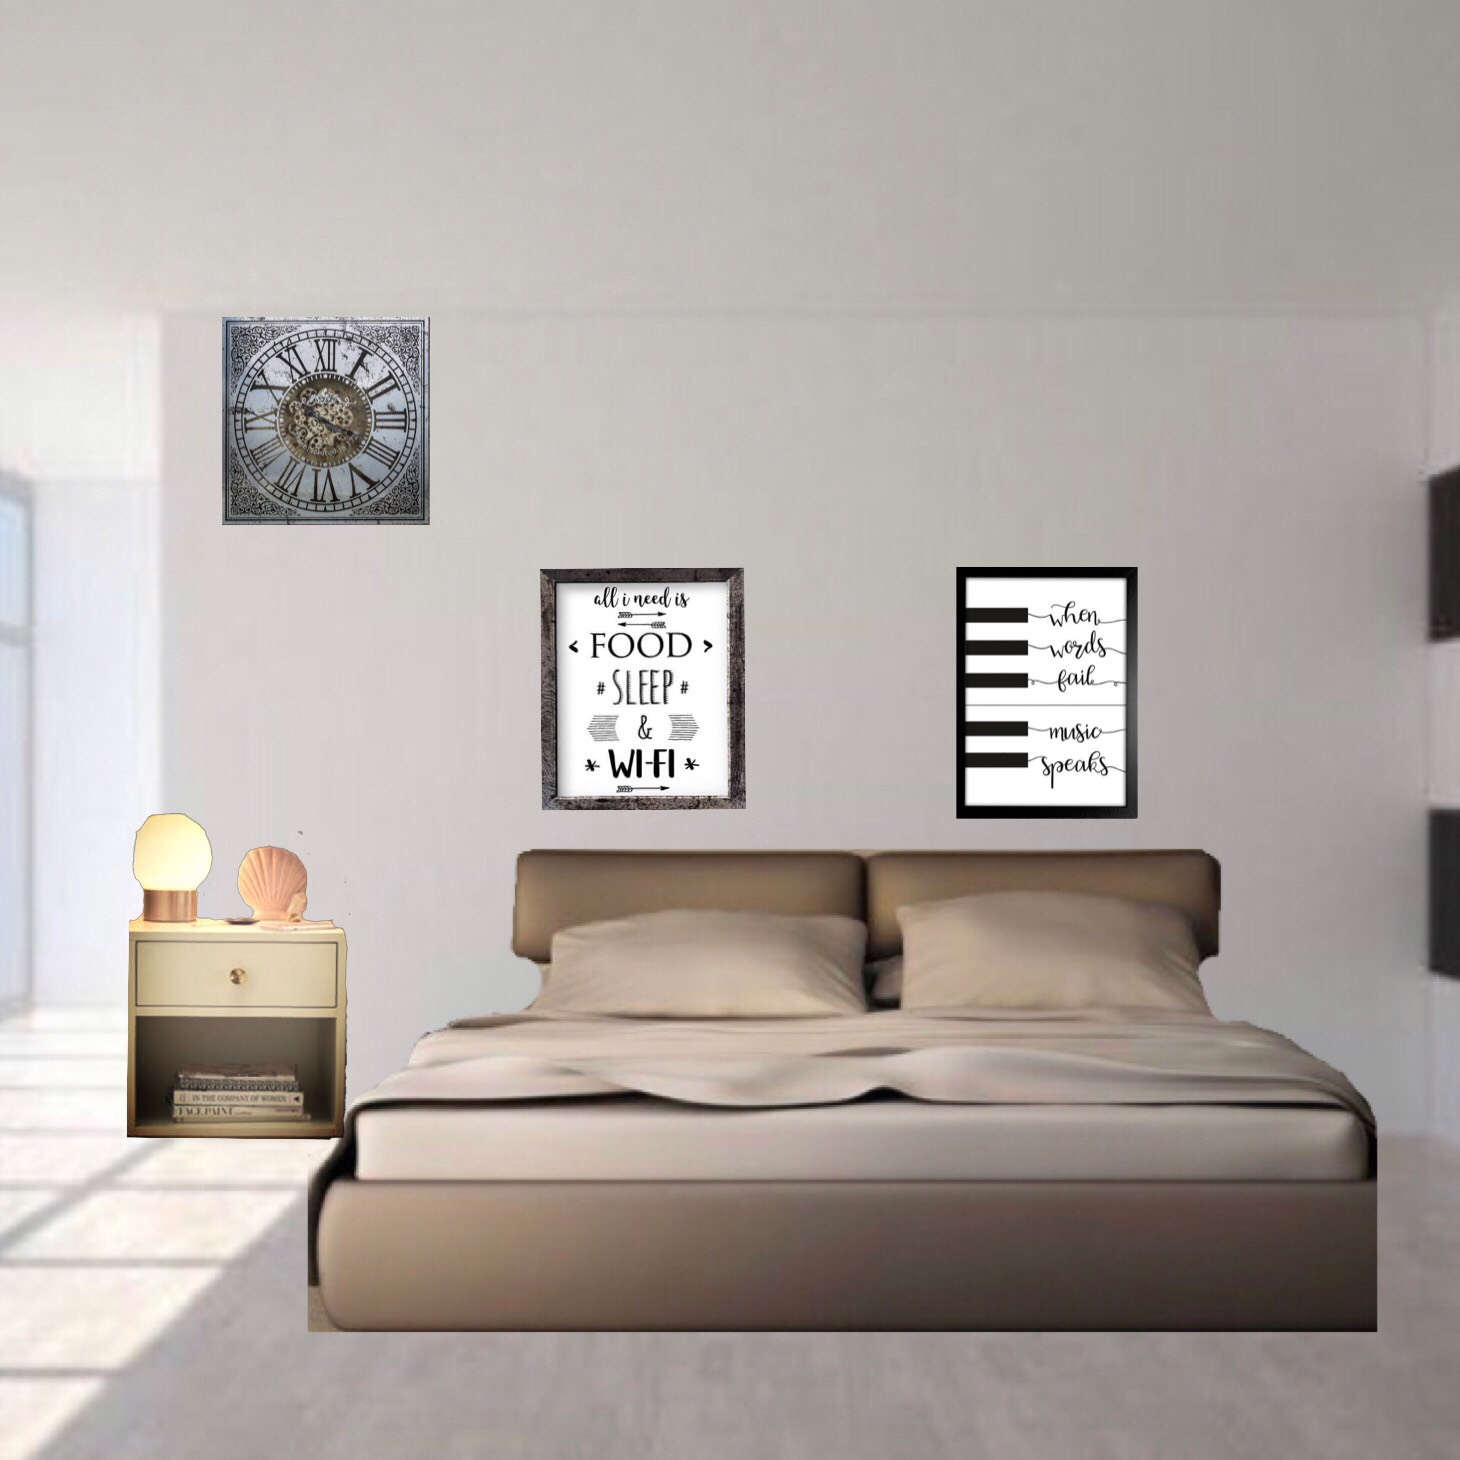 INT. DECORATED NEUTRAL BEDROOM – DAY